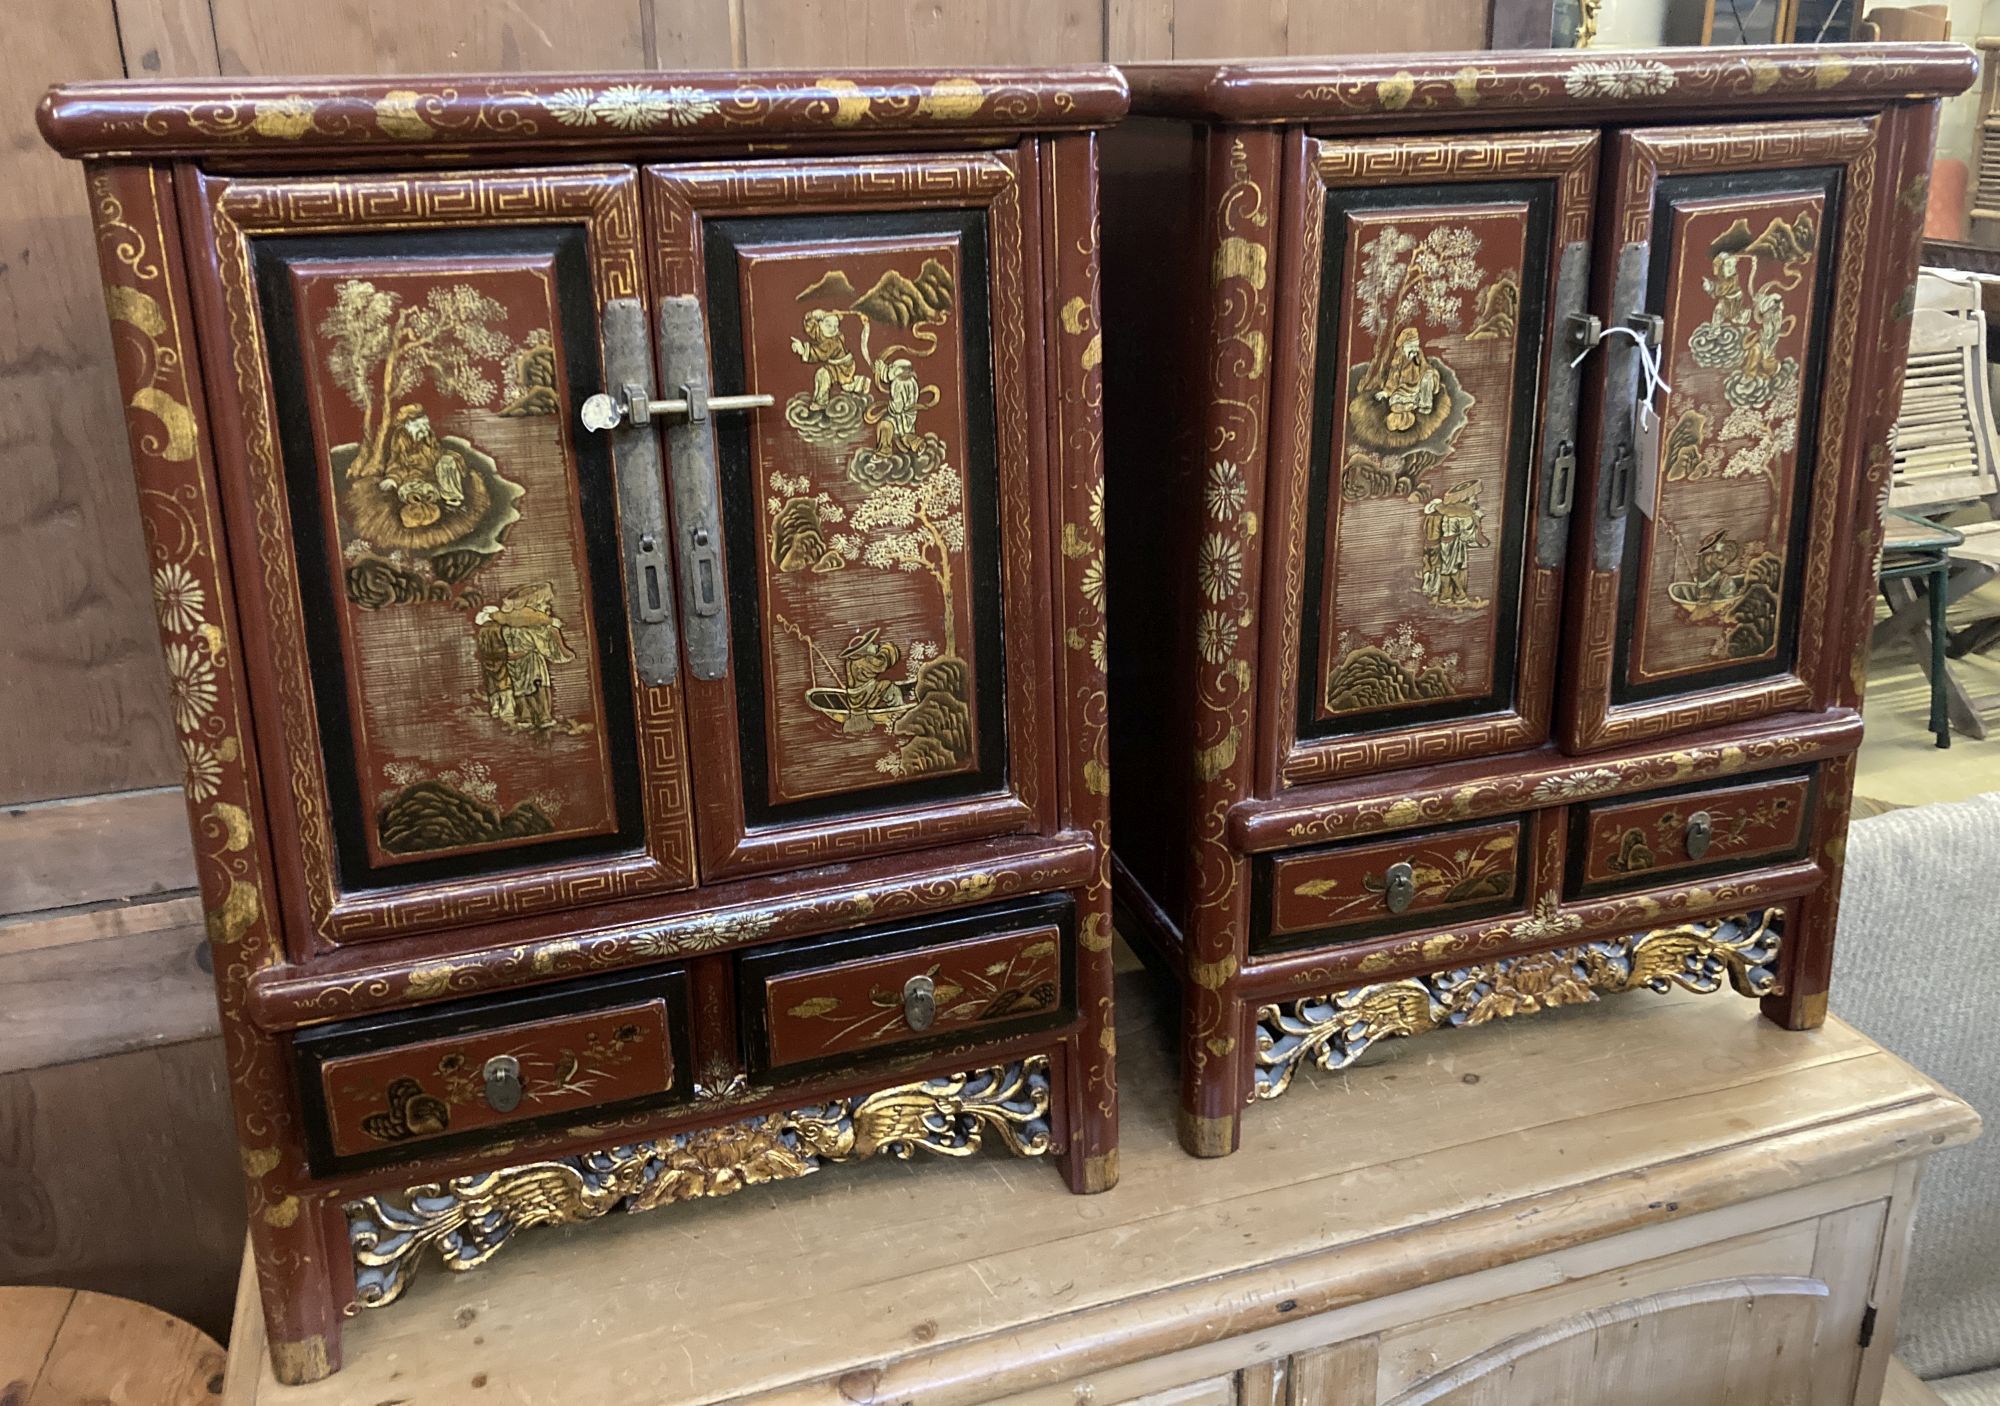 A pair of Chinese scarlet lacquer cabinets, width 54cm, depth 32cm, height 73cm